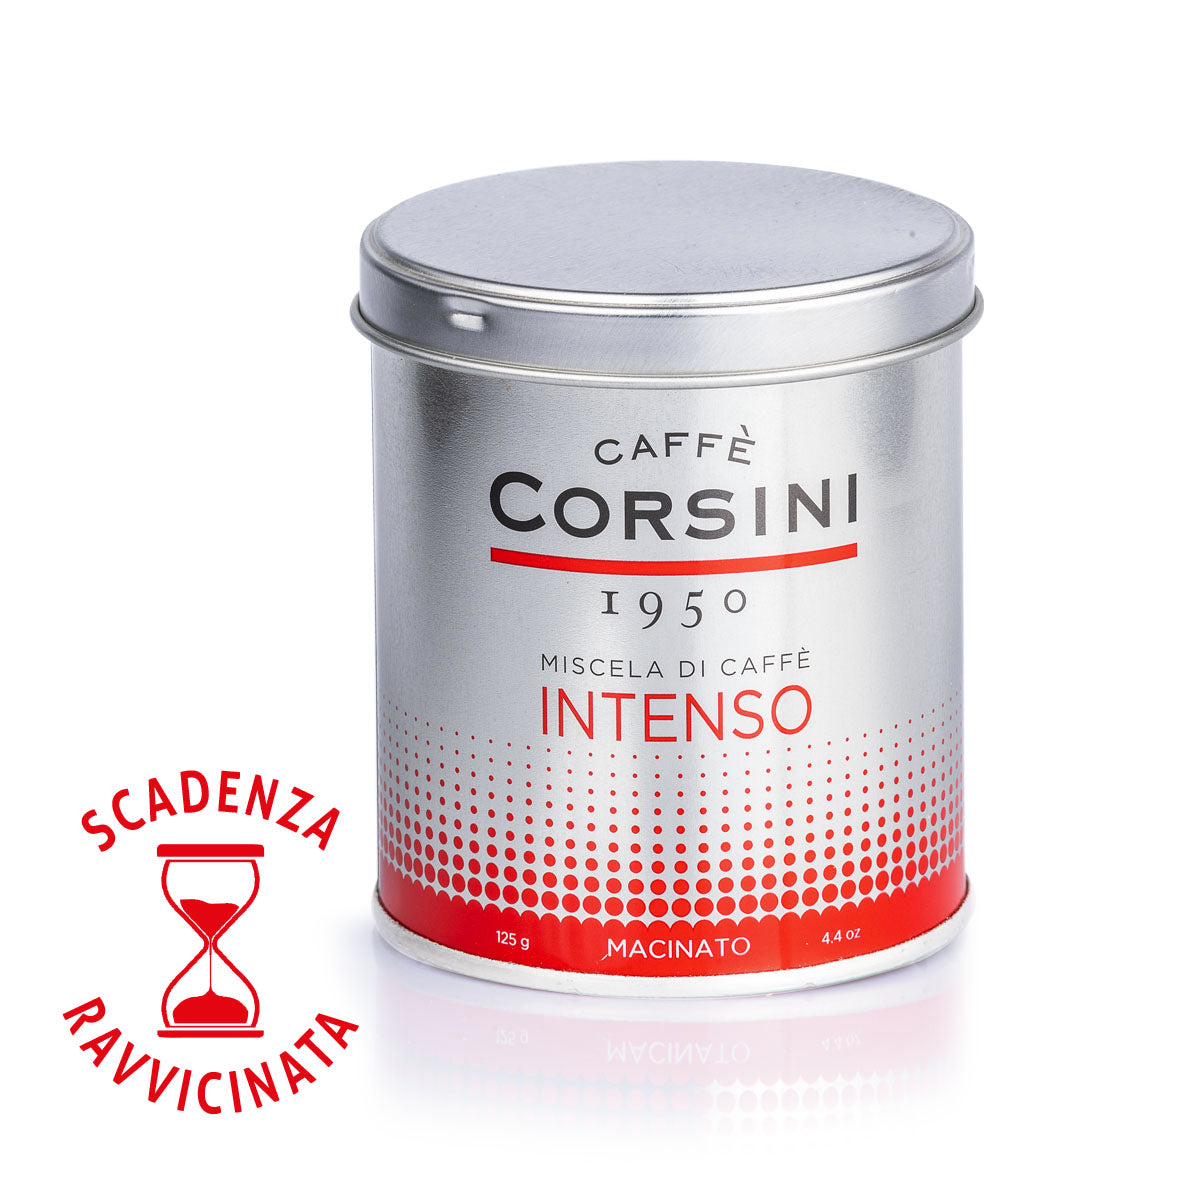 Ground coffee | CORSINI INTENSO | Can of 125g | Box of 10 cans